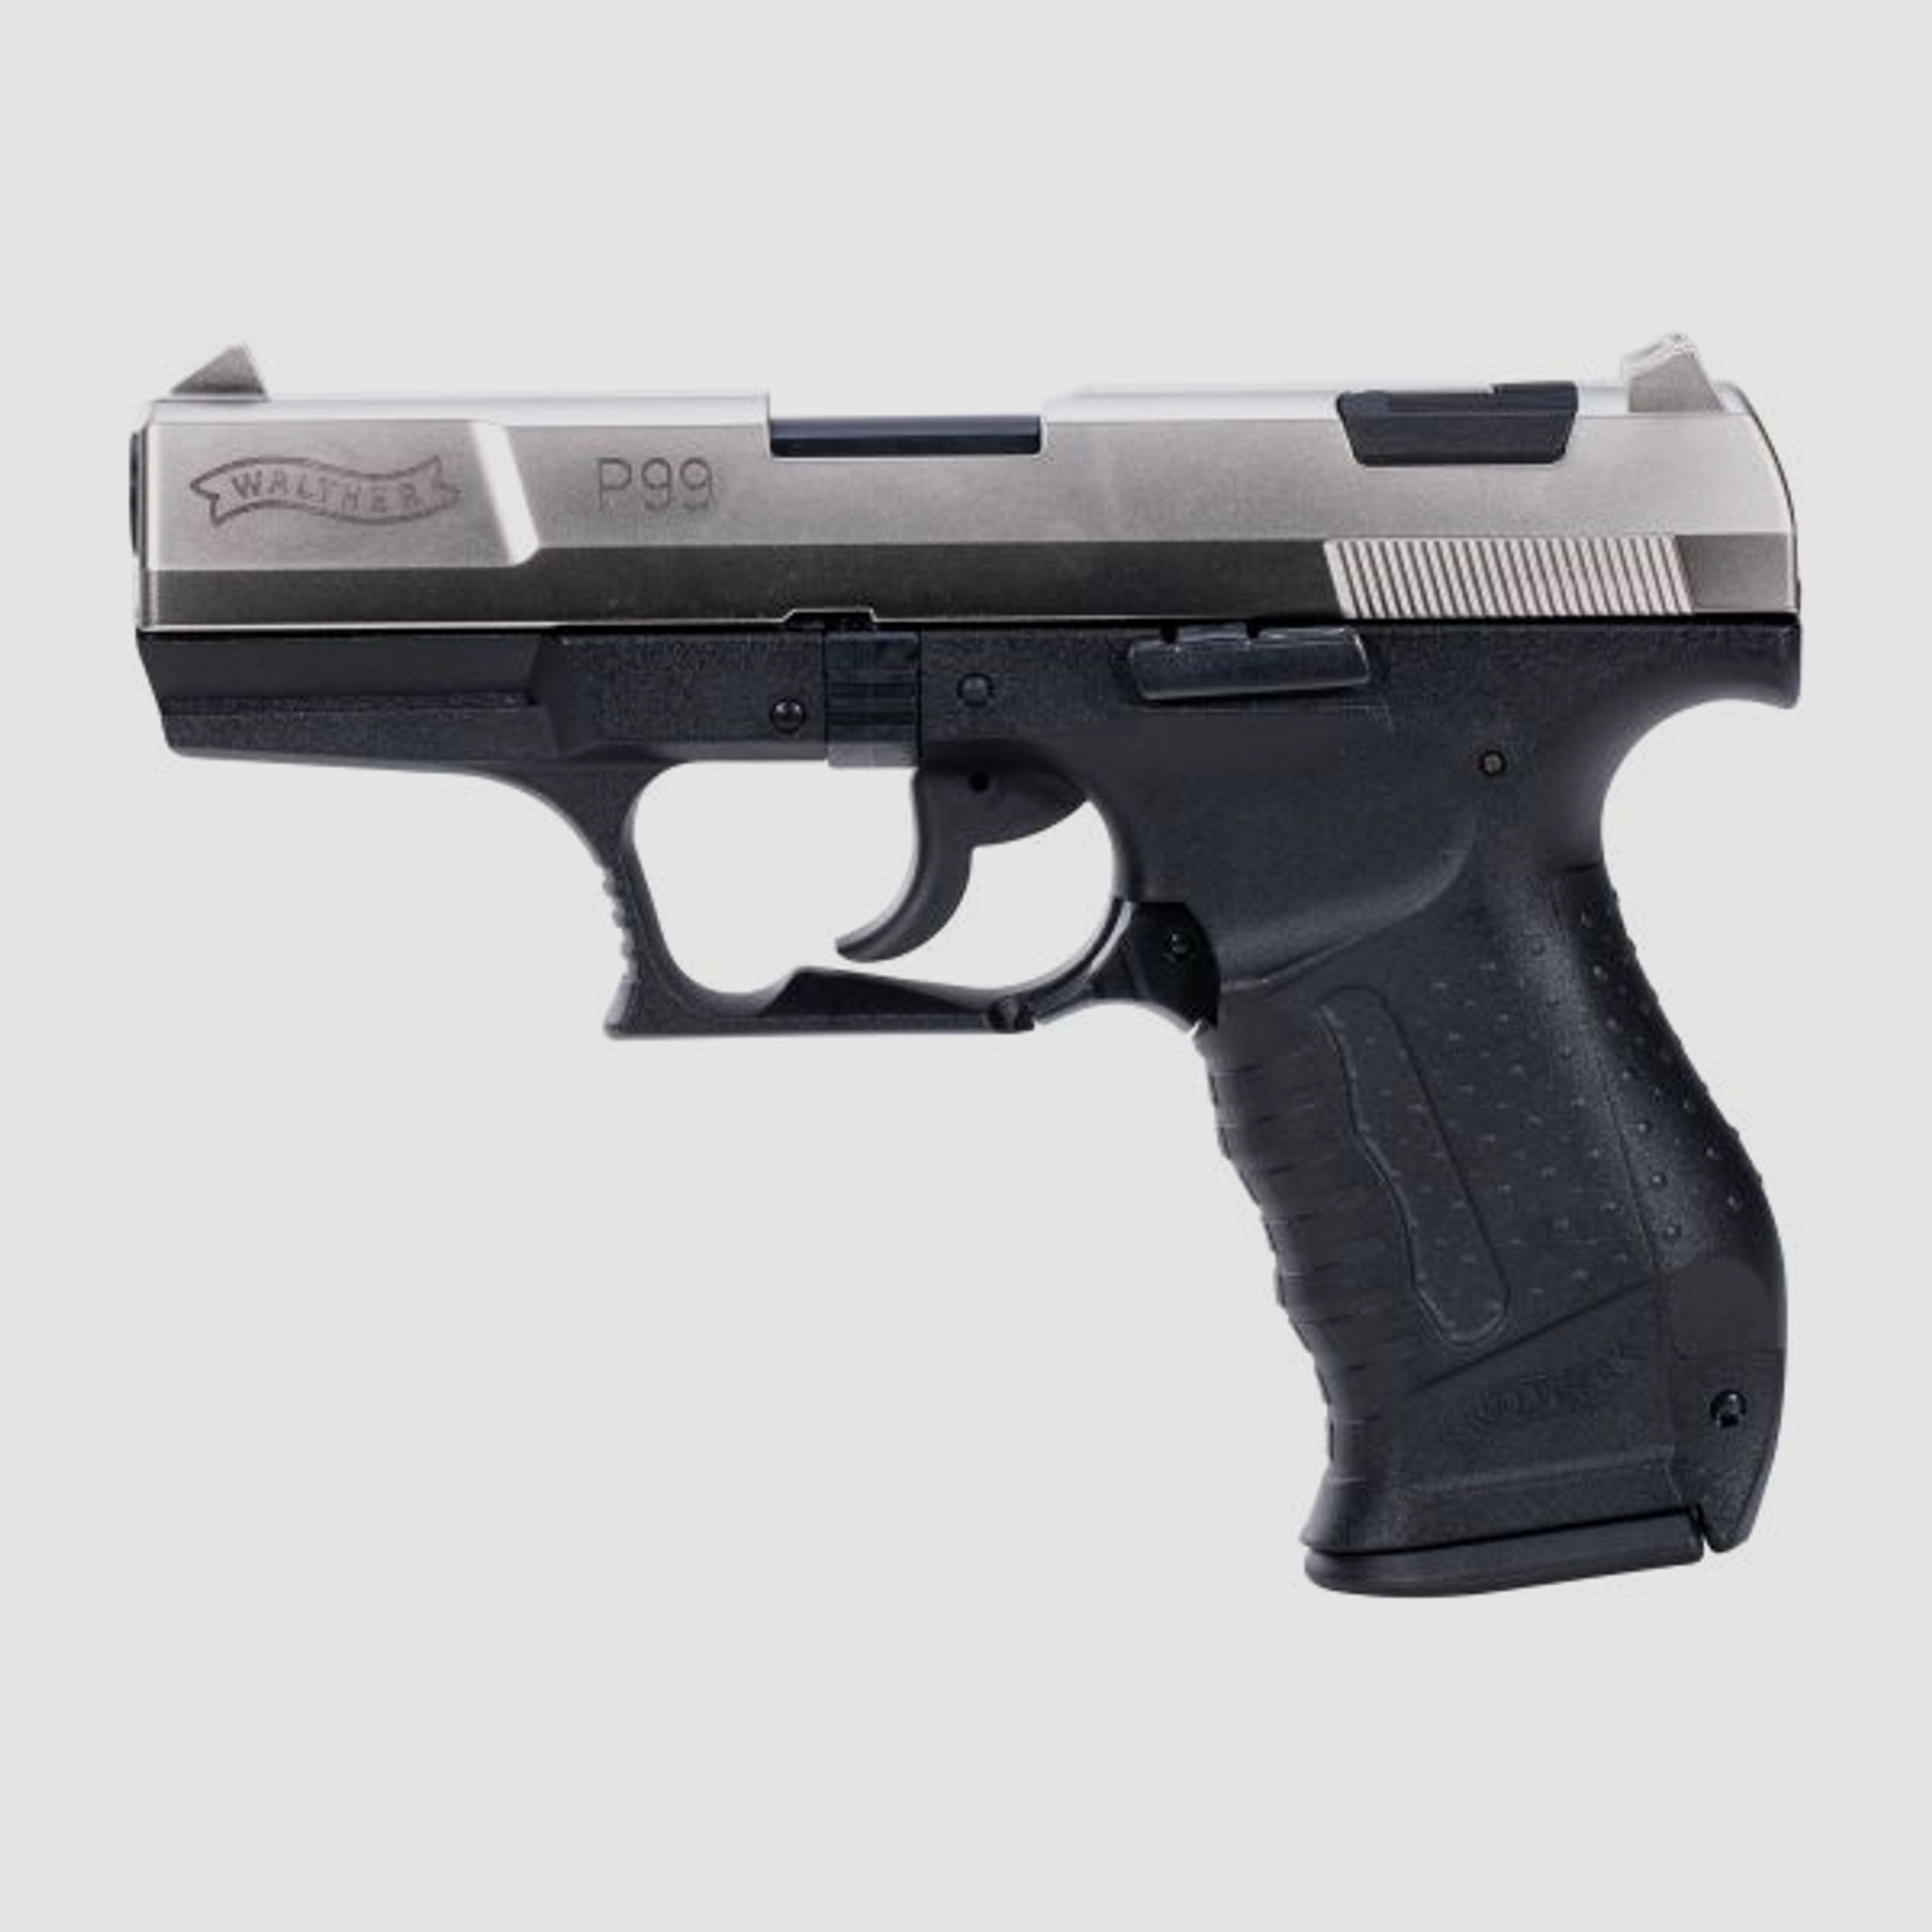 Walther Pistole Walther P99 bicolor